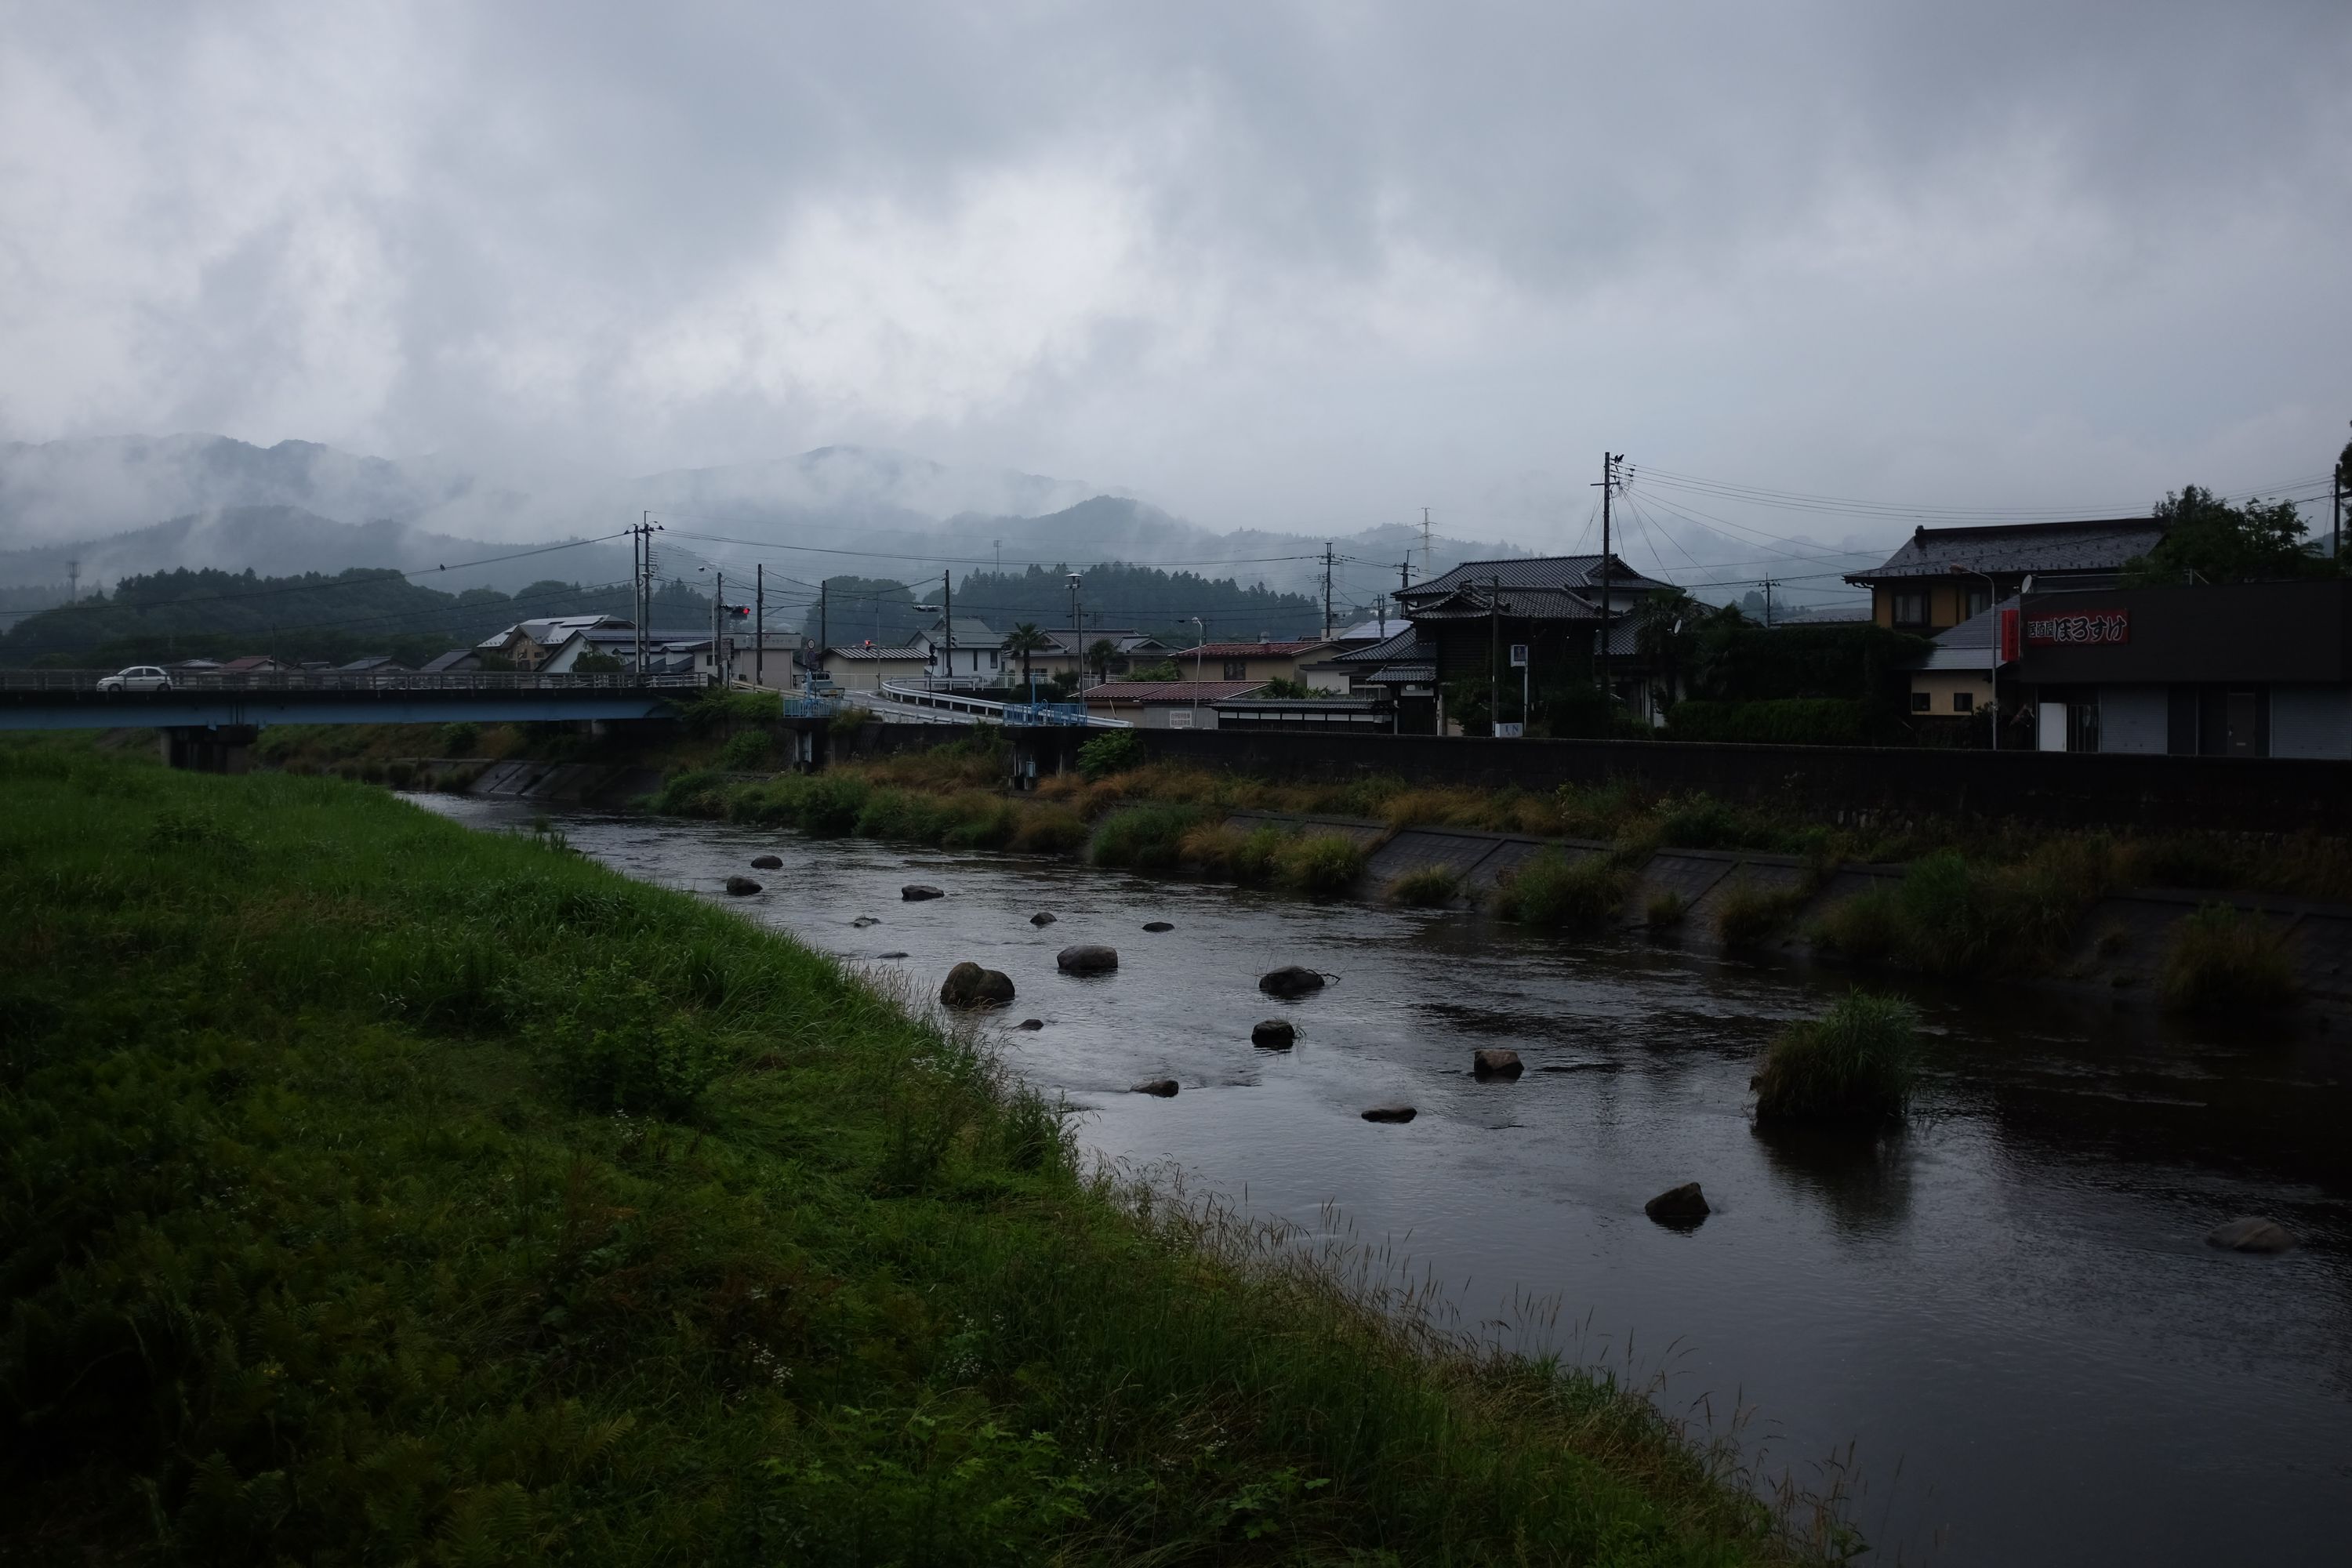 A village by a small river under overhanging grey clouds.